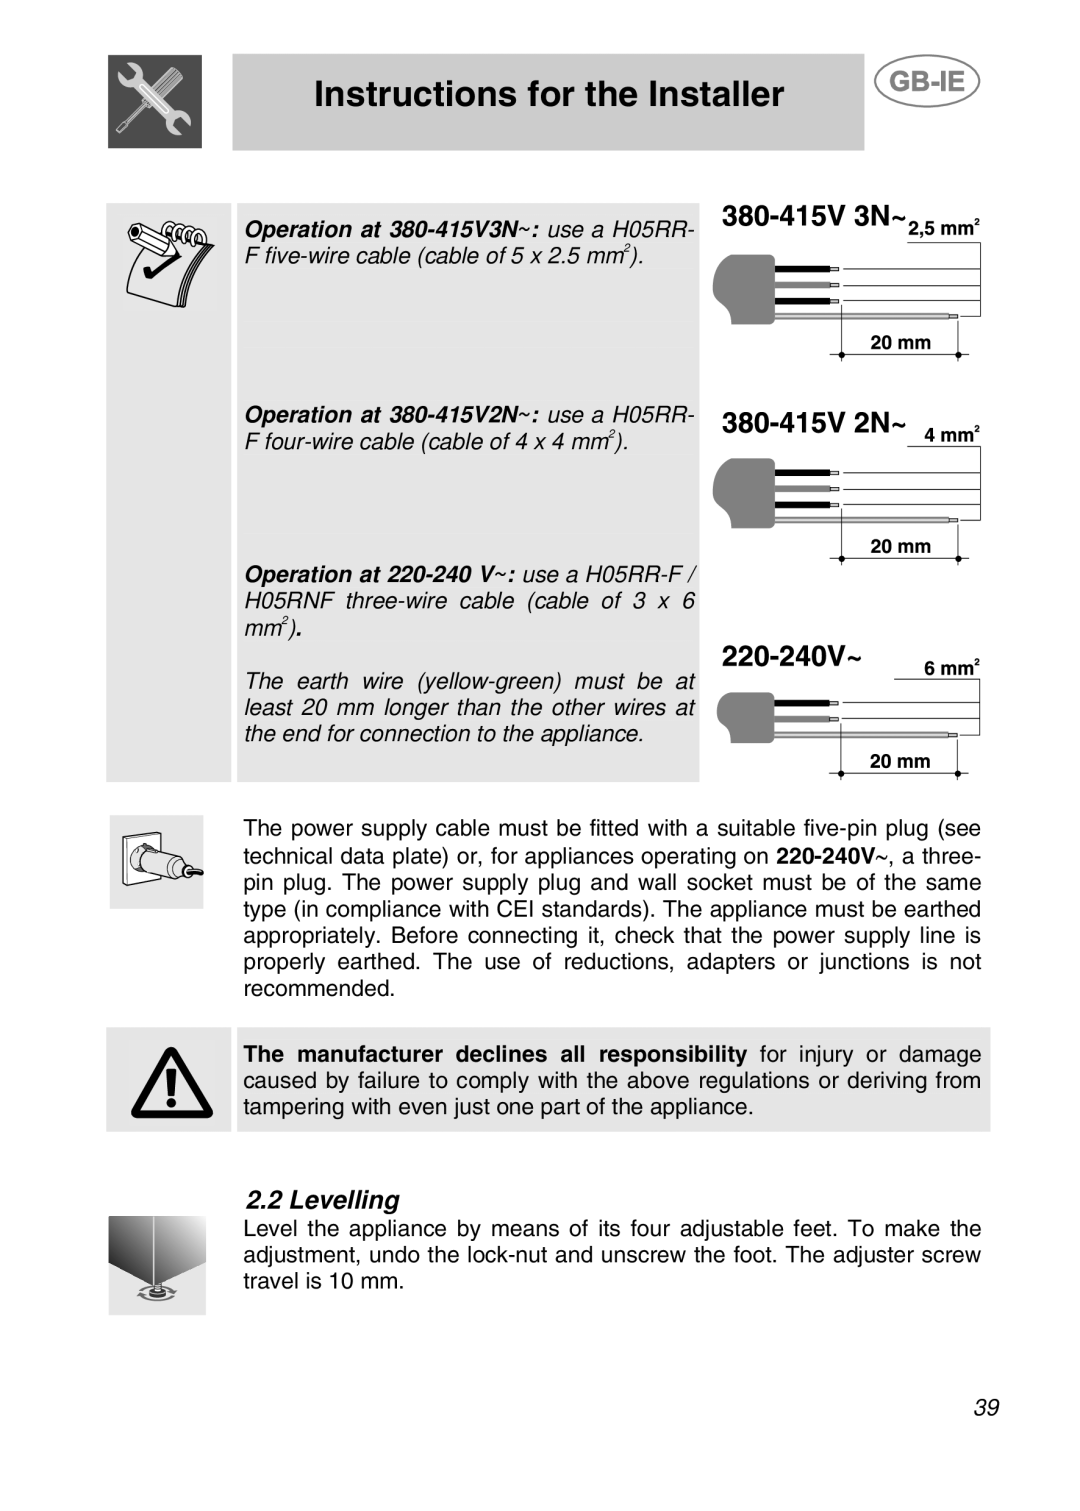 Smeg CS19ID-5 Instructions for the Installer, Operation at 380-415V3N~ use a H05RR, F five-wire cable cable of 5 x 2.5 mm2 